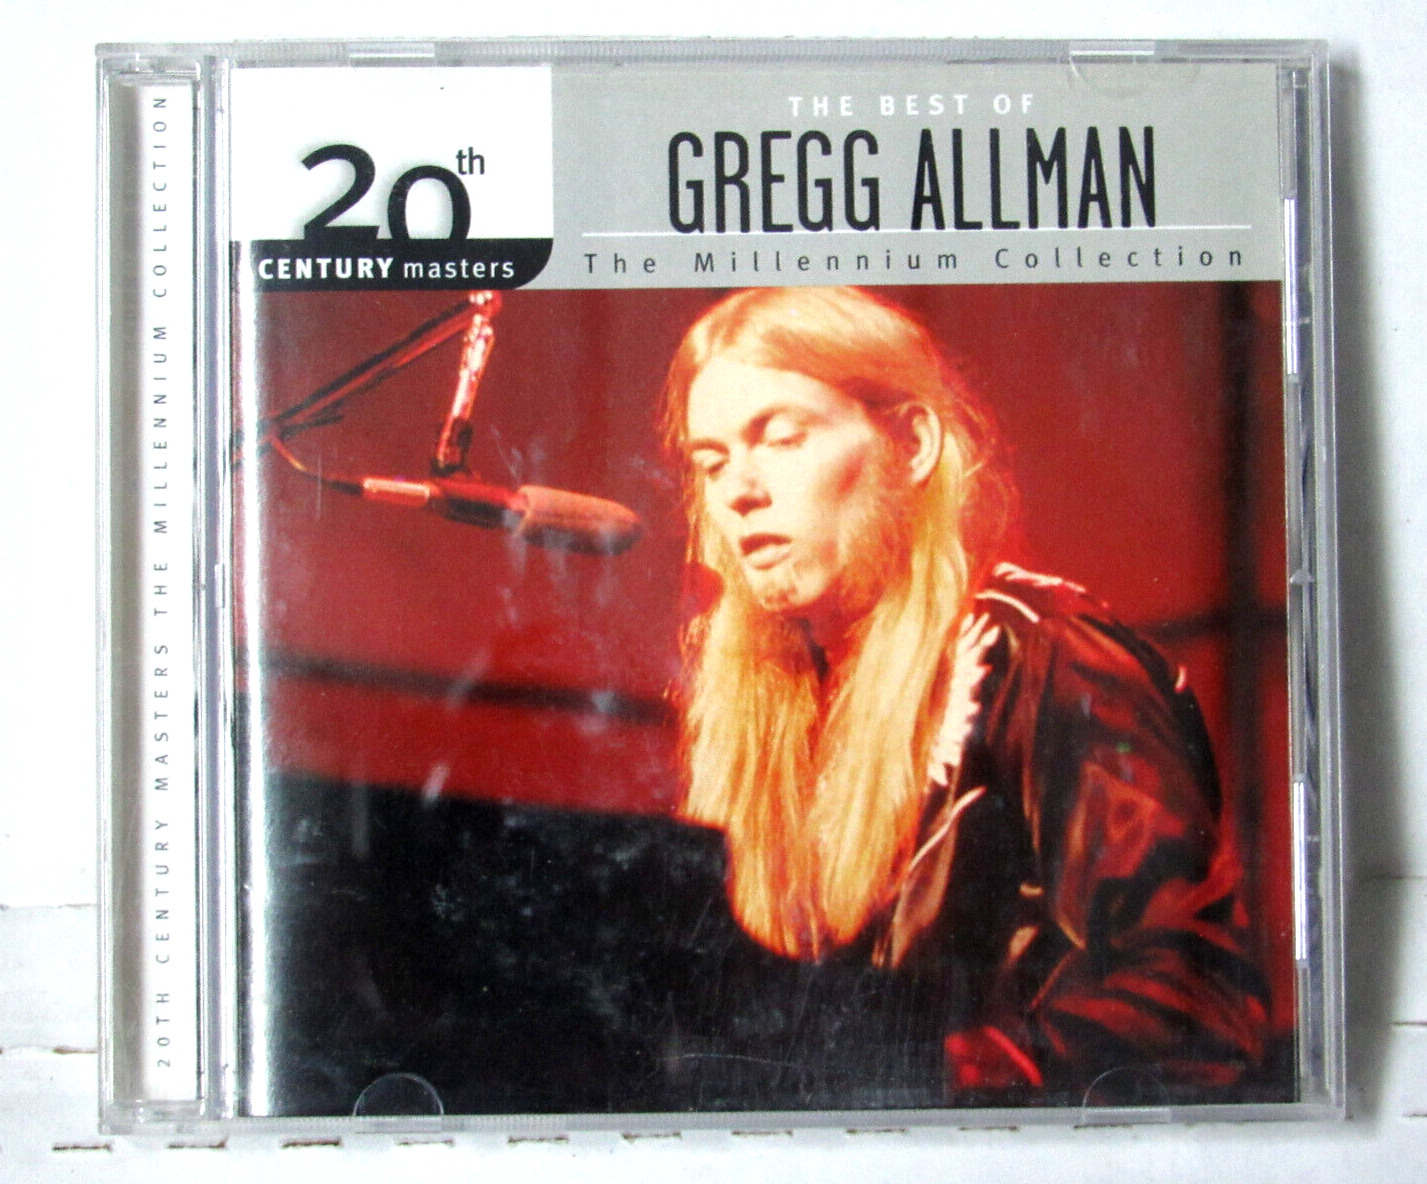 Gregg Allman 20th Century Masters The Millennium Collection CD Buy 2 get 1 FREE